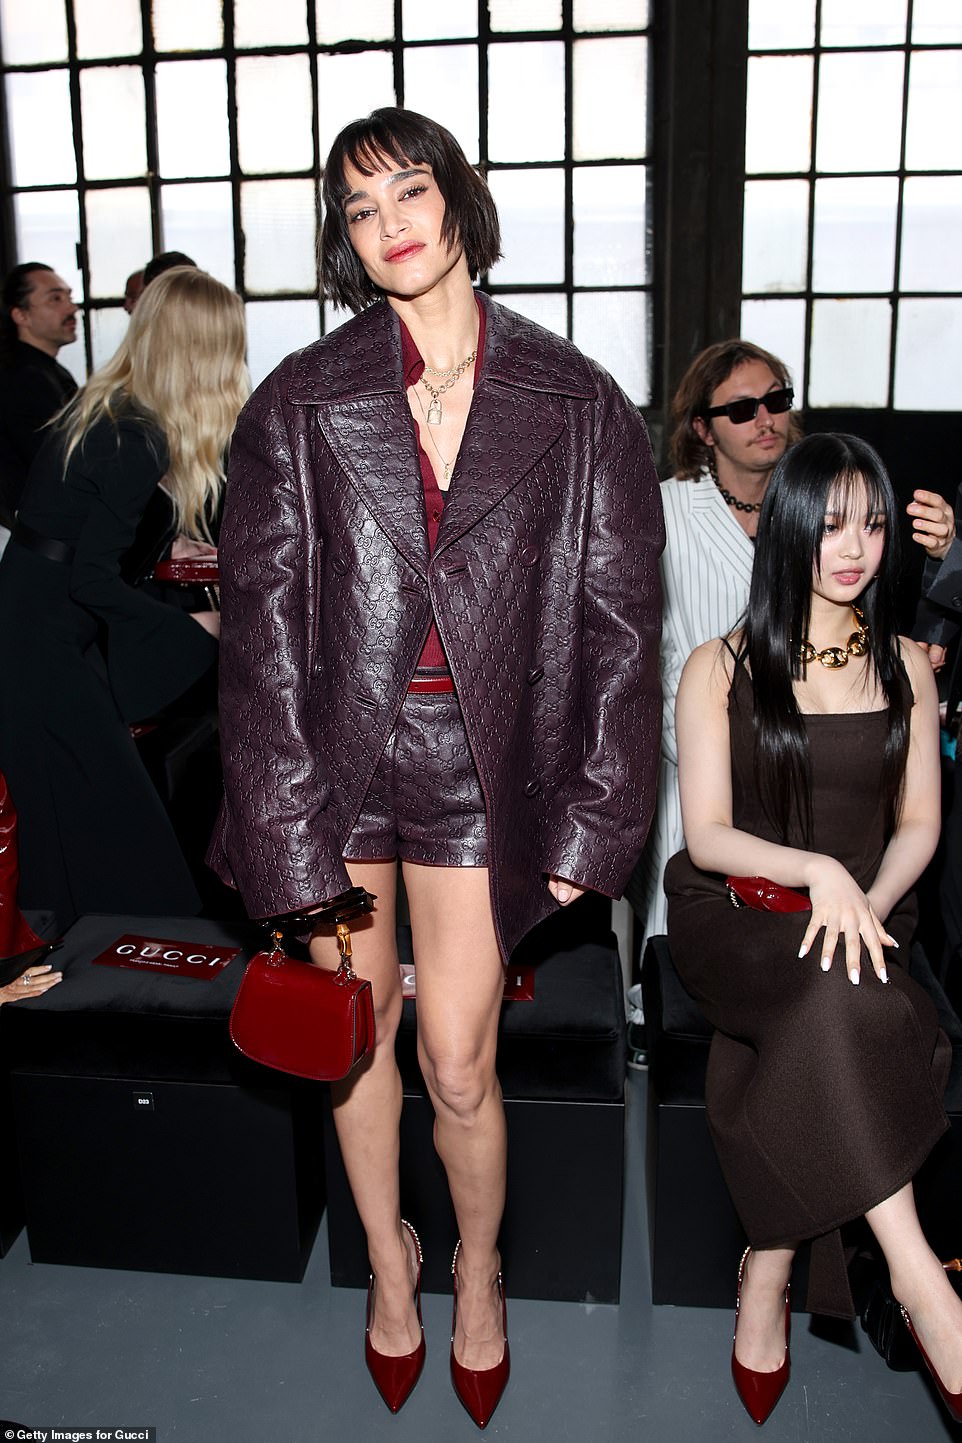 Sofia cut a fashionable appearance in a purple leather blazer jacket and matching shorts